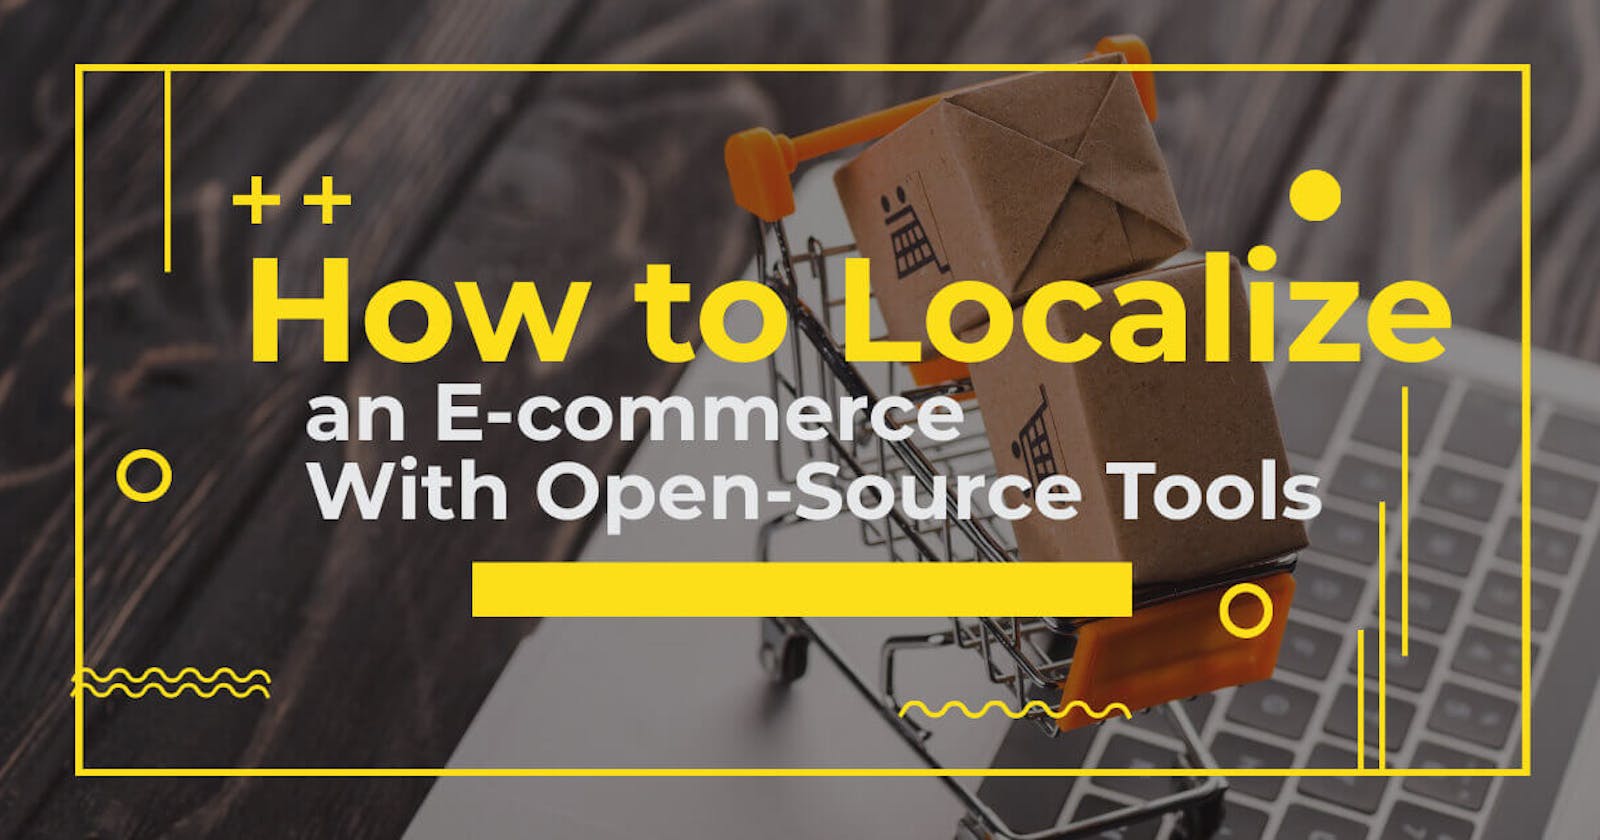 How to Localize an E-commerce With Open-Source Tools